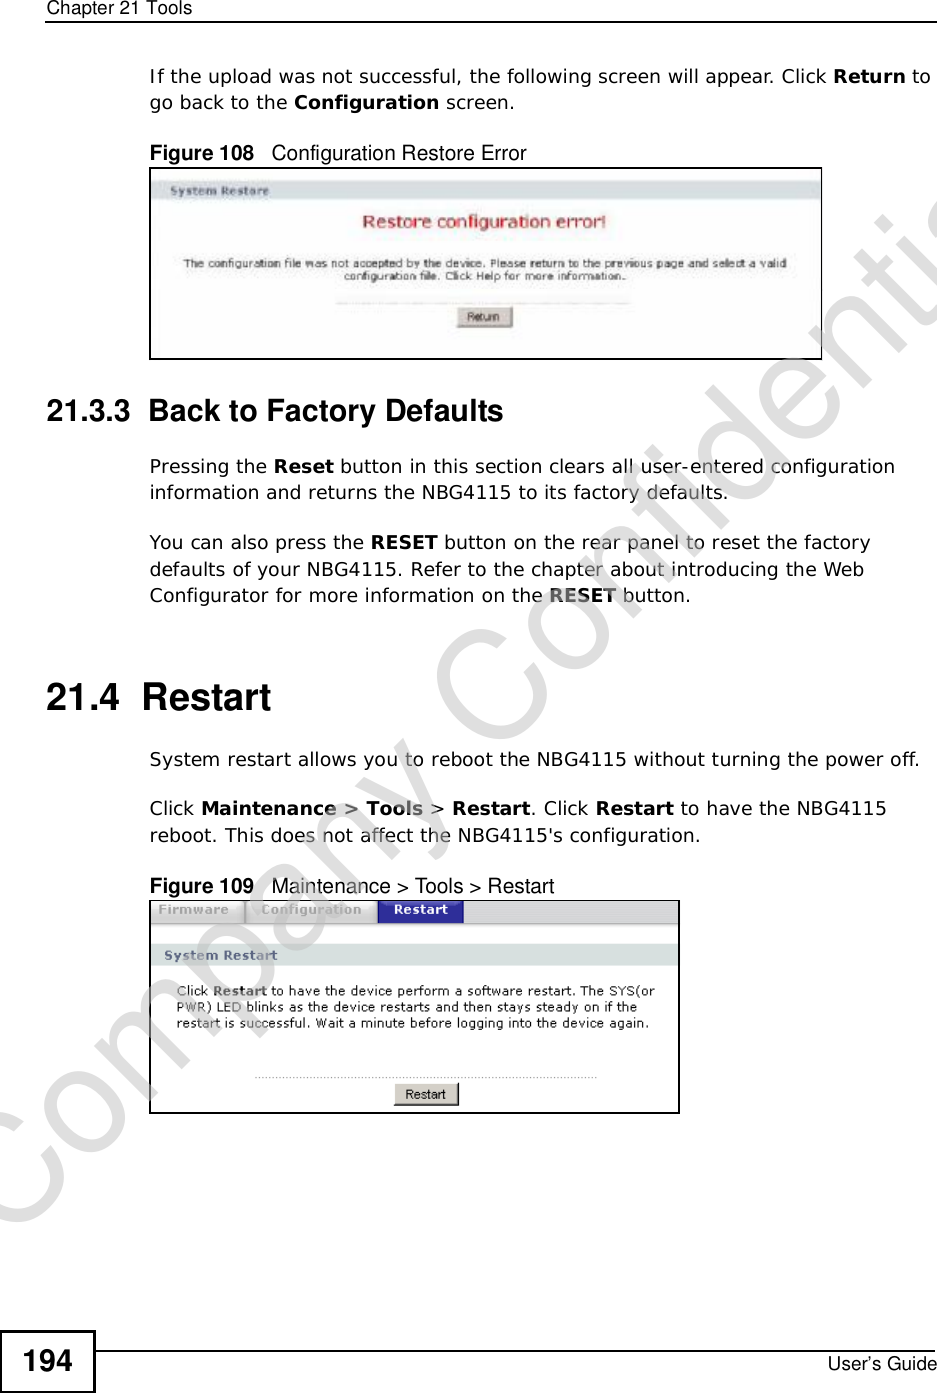 Chapter 21ToolsUser’s Guide194If the upload was not successful, the following screen will appear. Click Return to go back to the Configuration screen.Figure 108   Configuration Restore Error21.3.3  Back to Factory DefaultsPressing the Reset button in this section clears all user-entered configuration information and returns the NBG4115 to its factory defaults.You can also press the RESET button on the rear panel to reset the factory defaults of your NBG4115. Refer to the chapter about introducing the Web Configurator for more information on the RESET button.21.4  RestartSystem restart allows you to reboot the NBG4115 without turning the power off. Click Maintenance &gt; Tools &gt; Restart. Click Restart to have the NBG4115 reboot. This does not affect the NBG4115&apos;s configuration.Figure 109   Maintenance &gt; Tools &gt; Restart Company Confidential